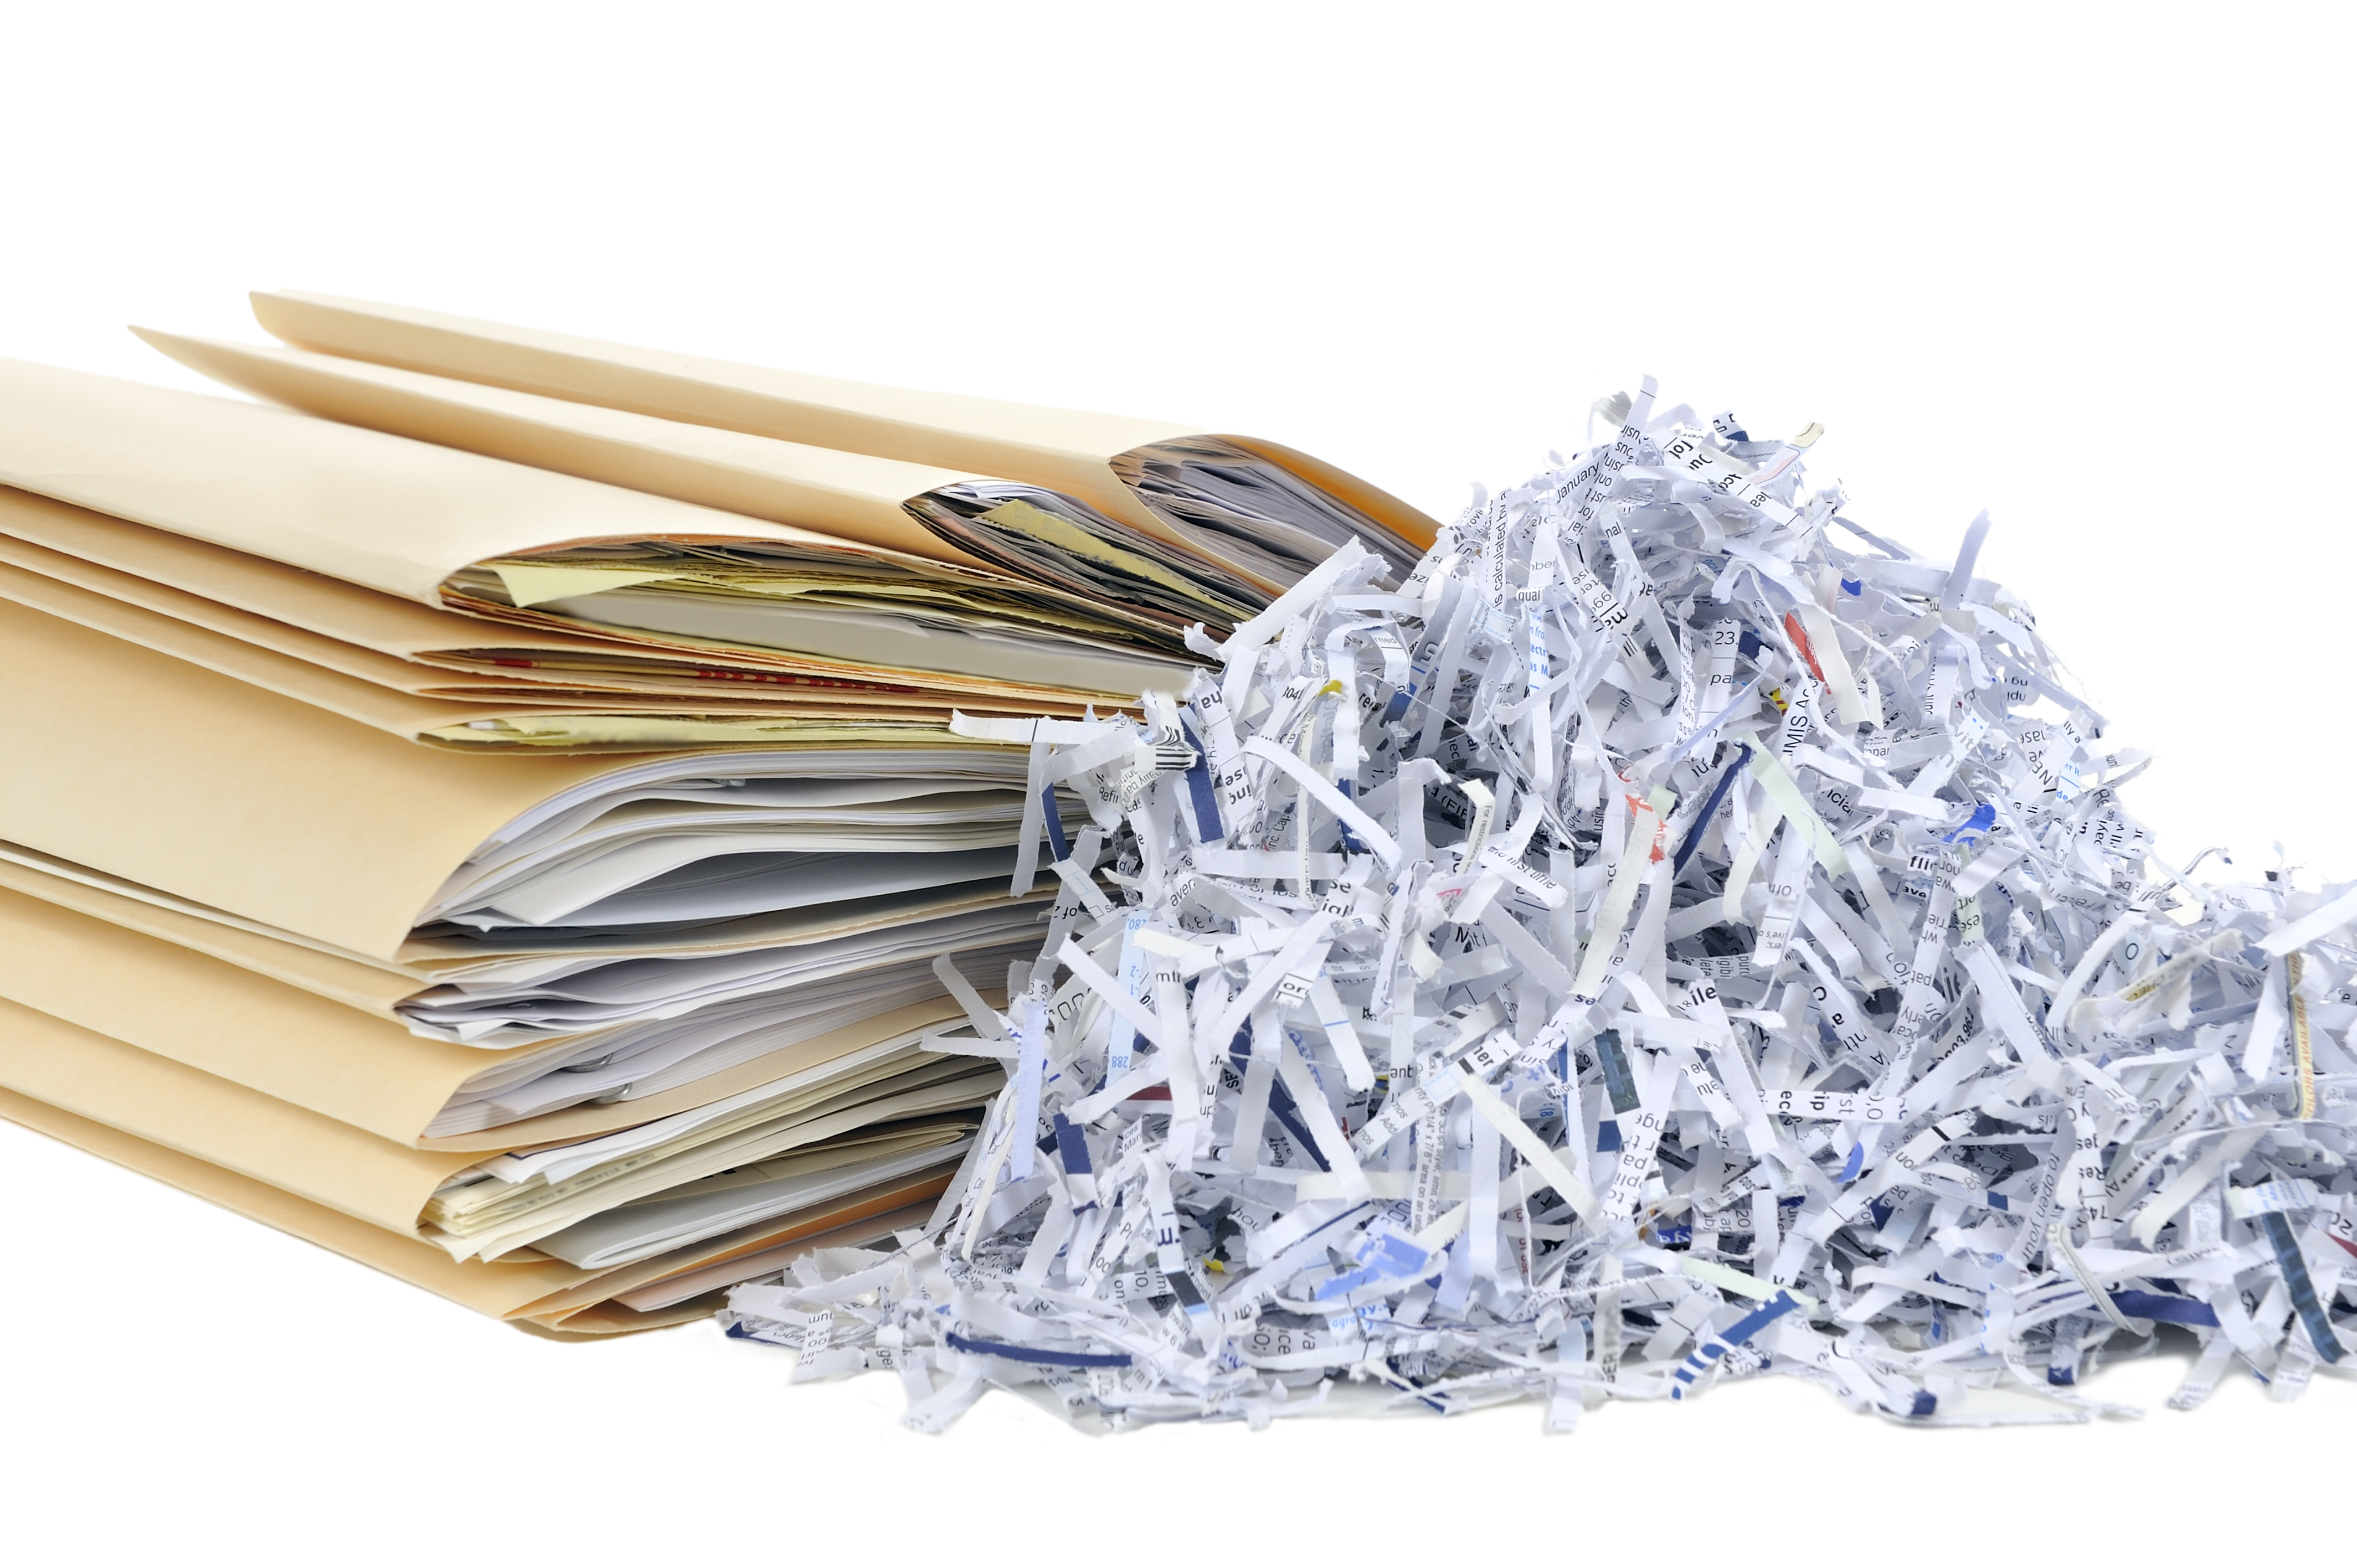 How to recycle shredded paper - Recycle Coach